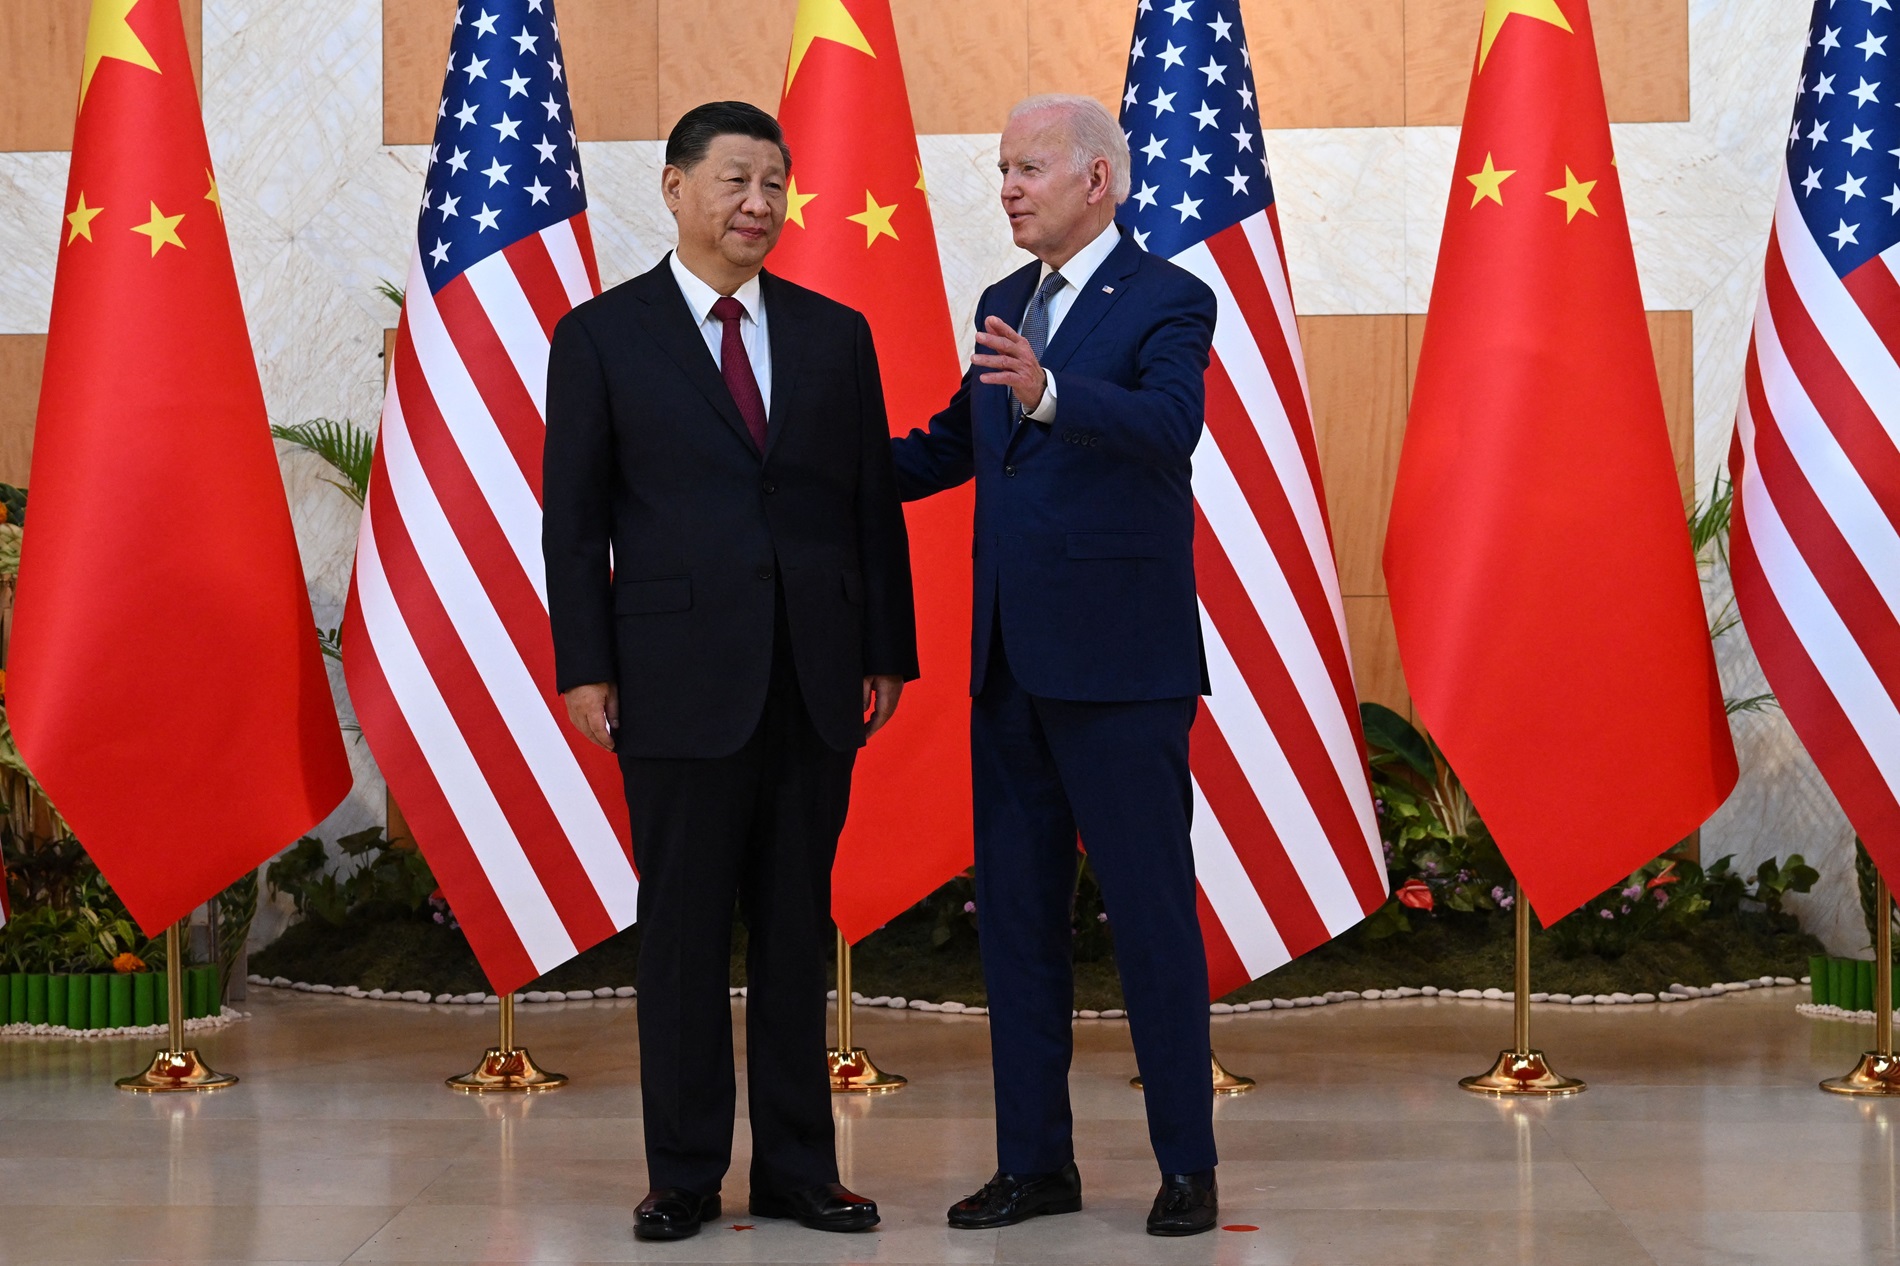 Does America Have an End Game on China?